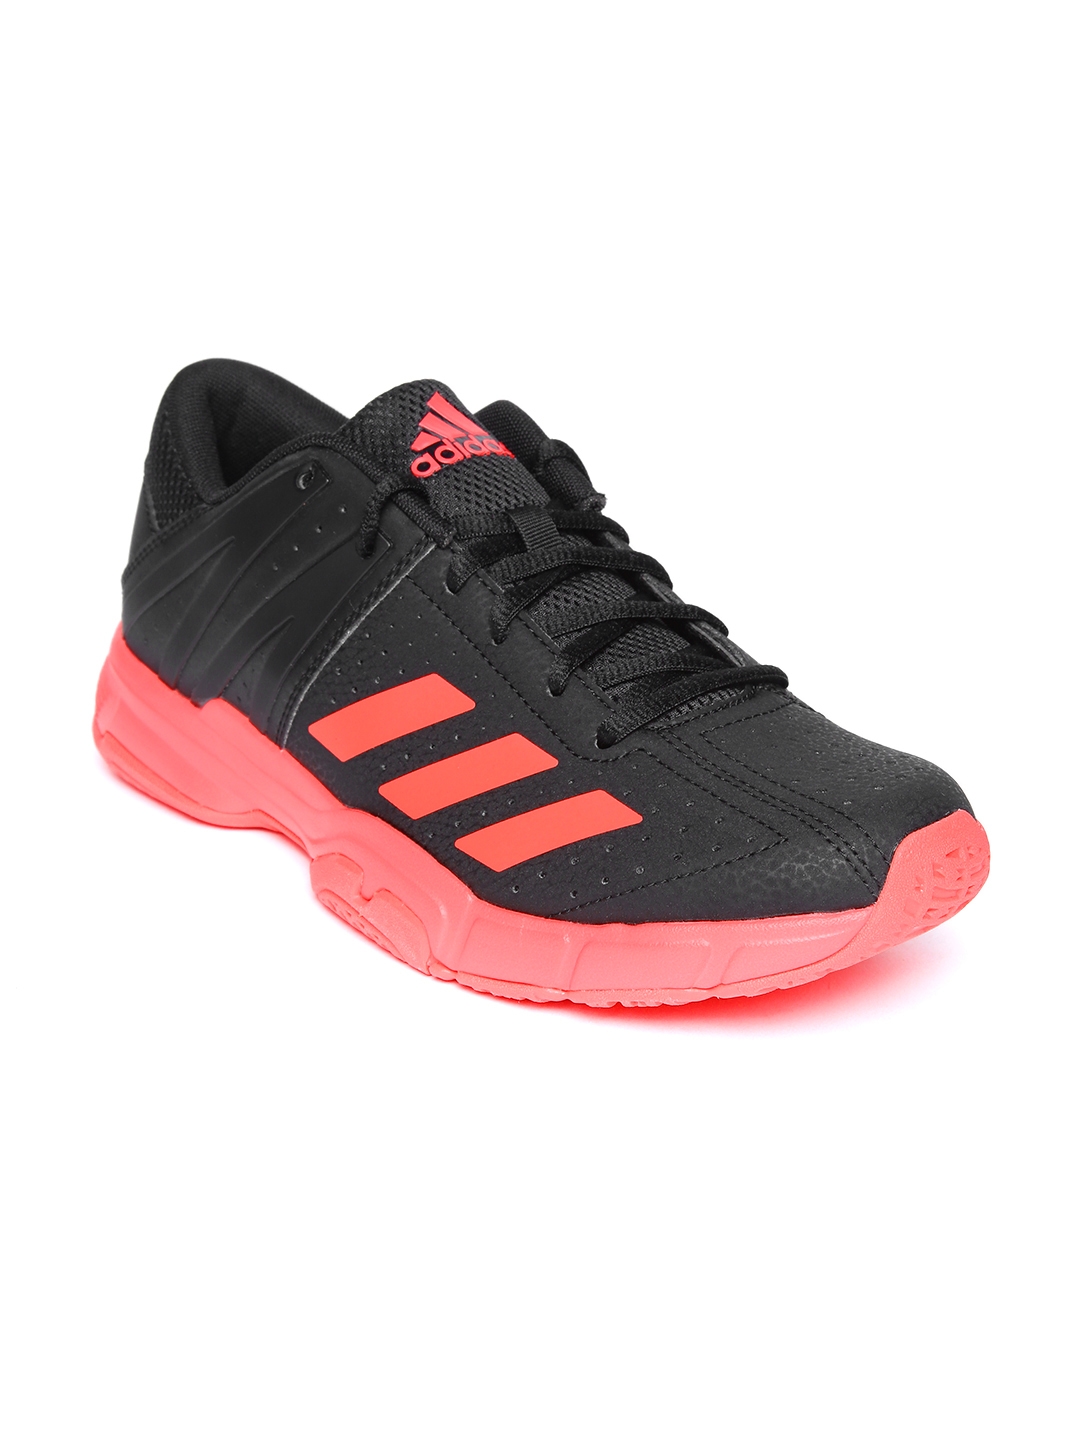 adidas wucht p3 shoes